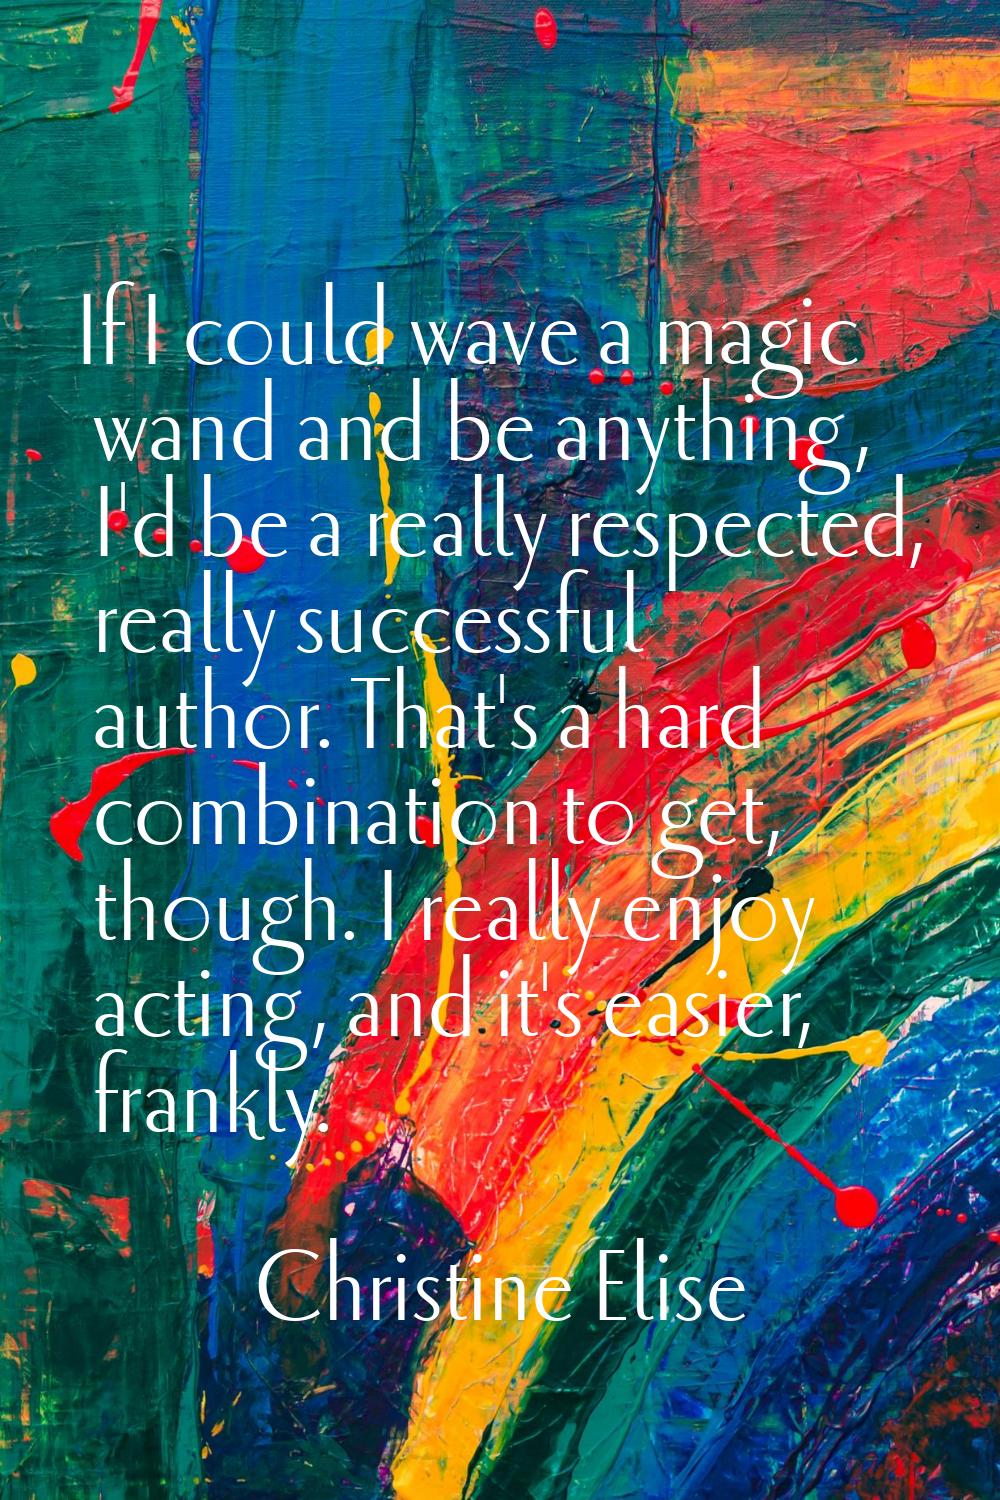 If I could wave a magic wand and be anything, I'd be a really respected, really successful author. 